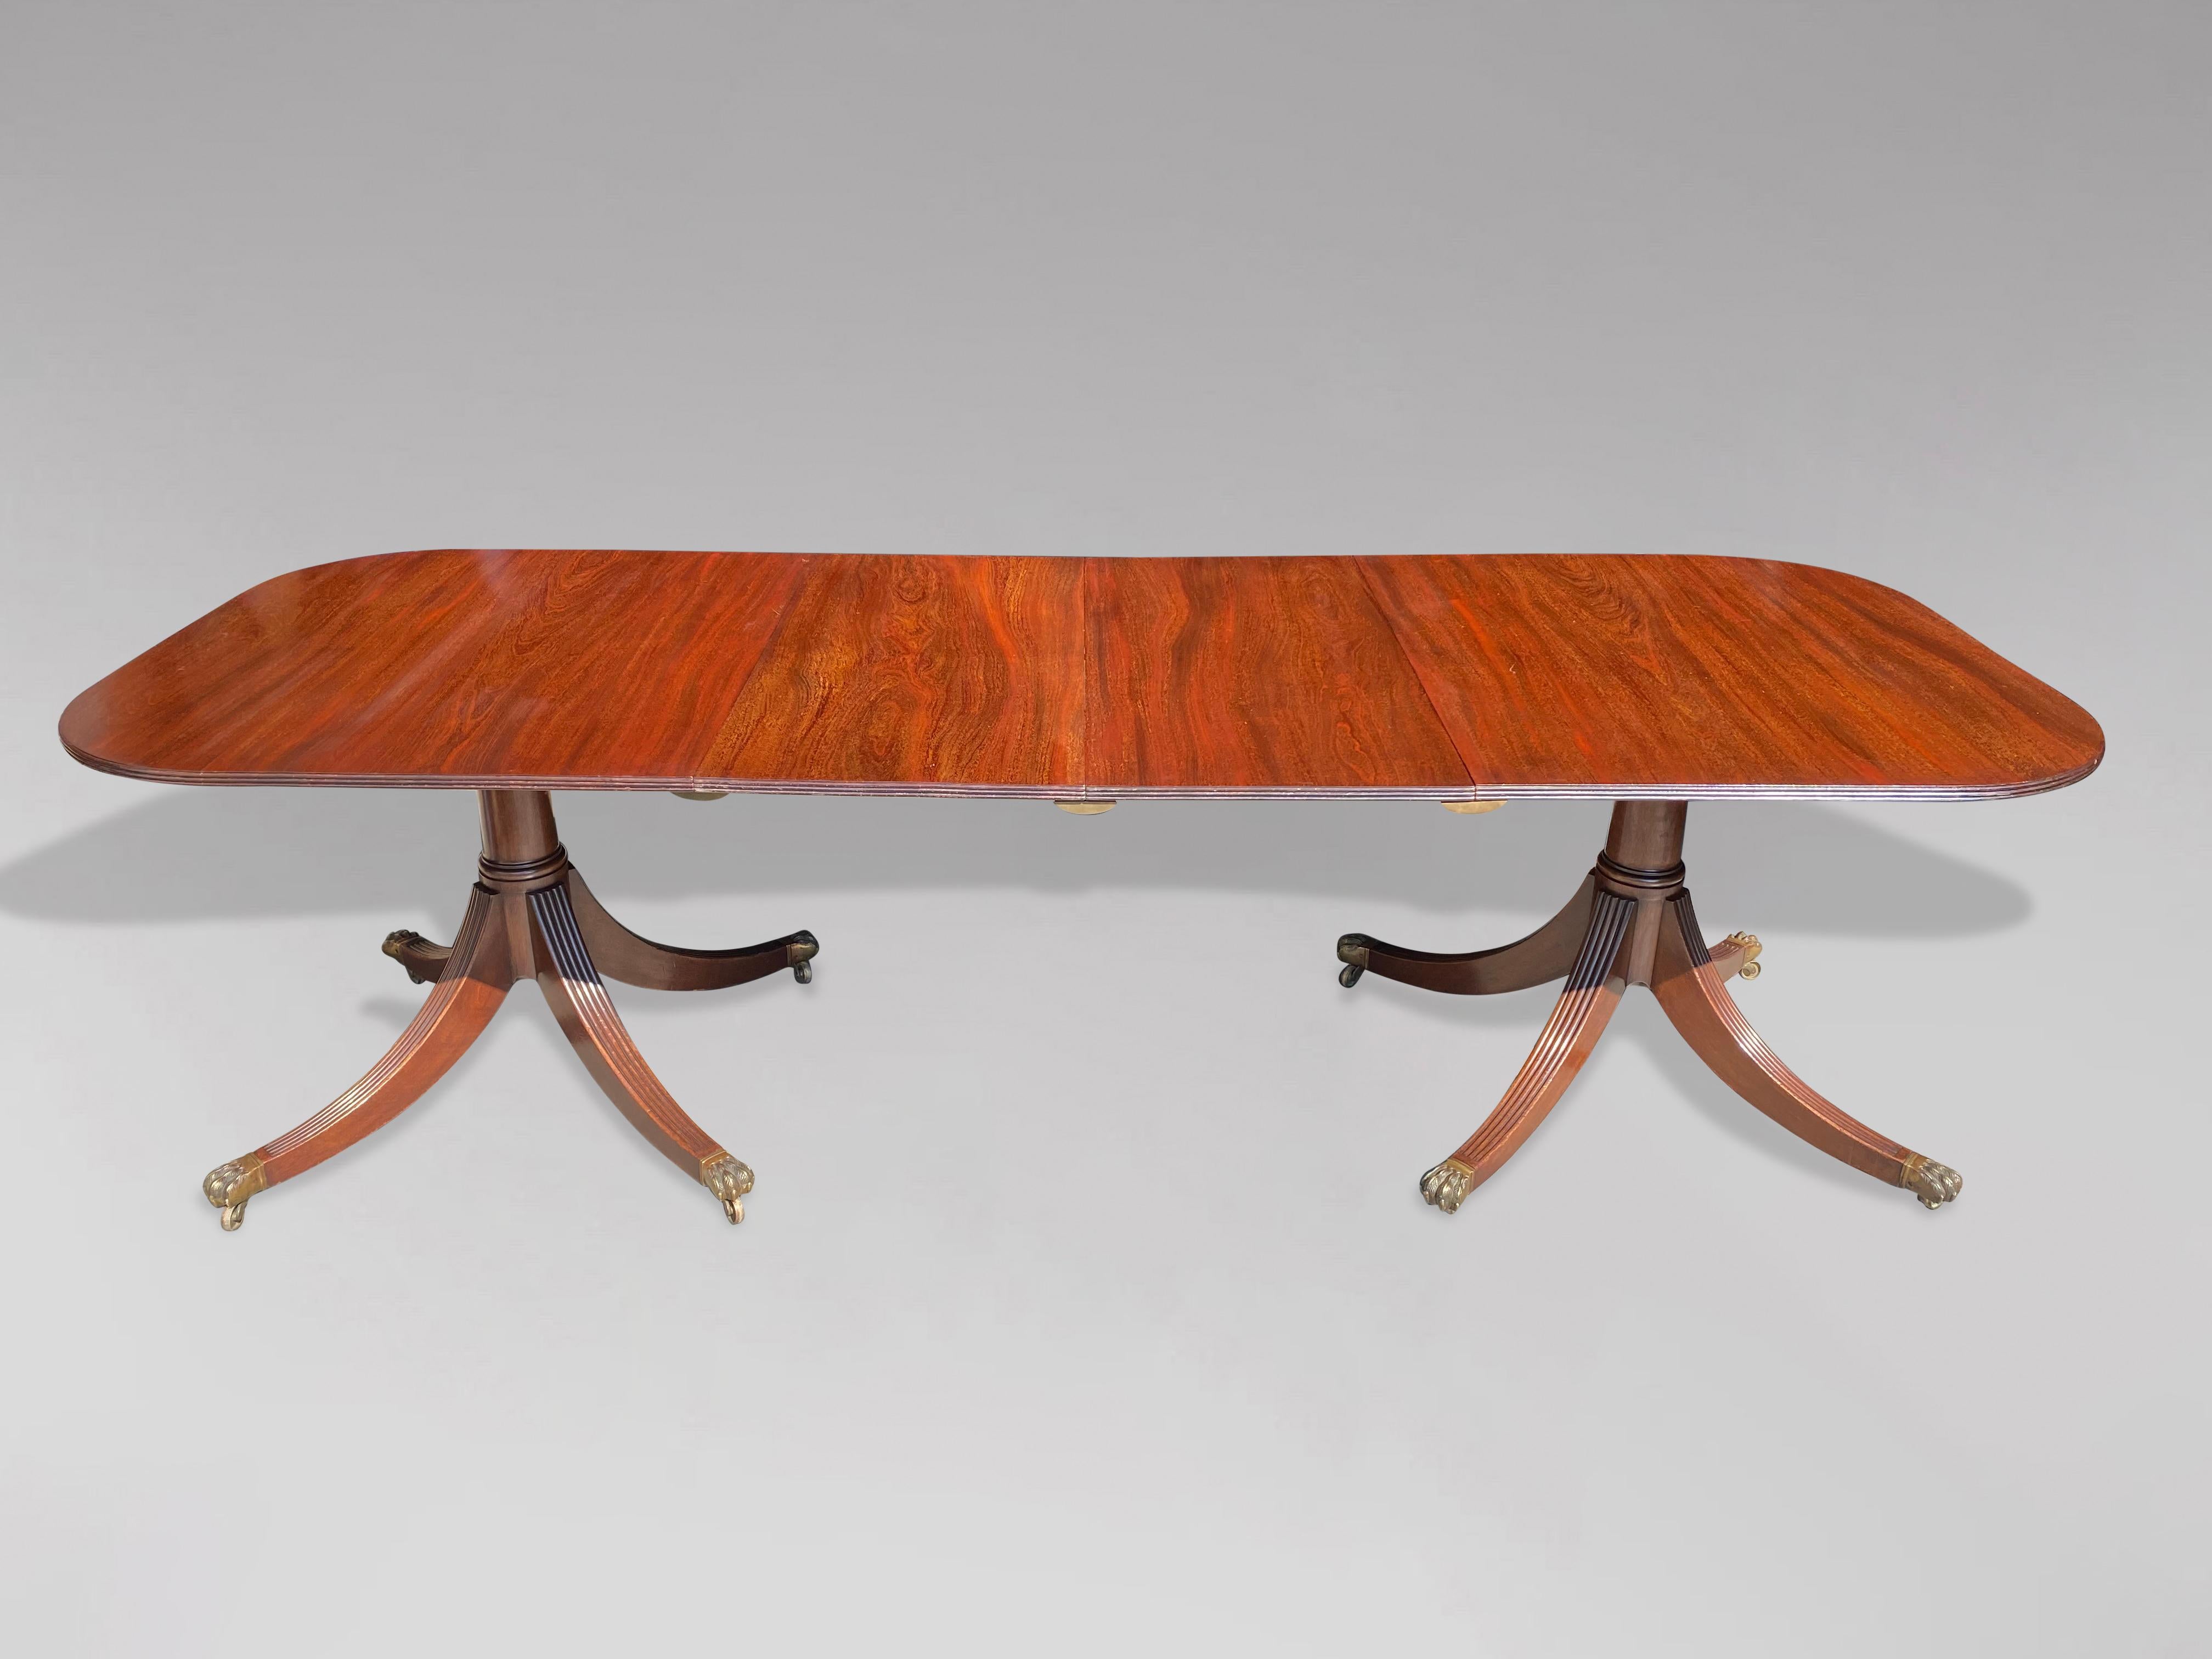 Edwardian Period Mahogany Two Pedestal Dining Table In Good Condition In Petworth,West Sussex, GB